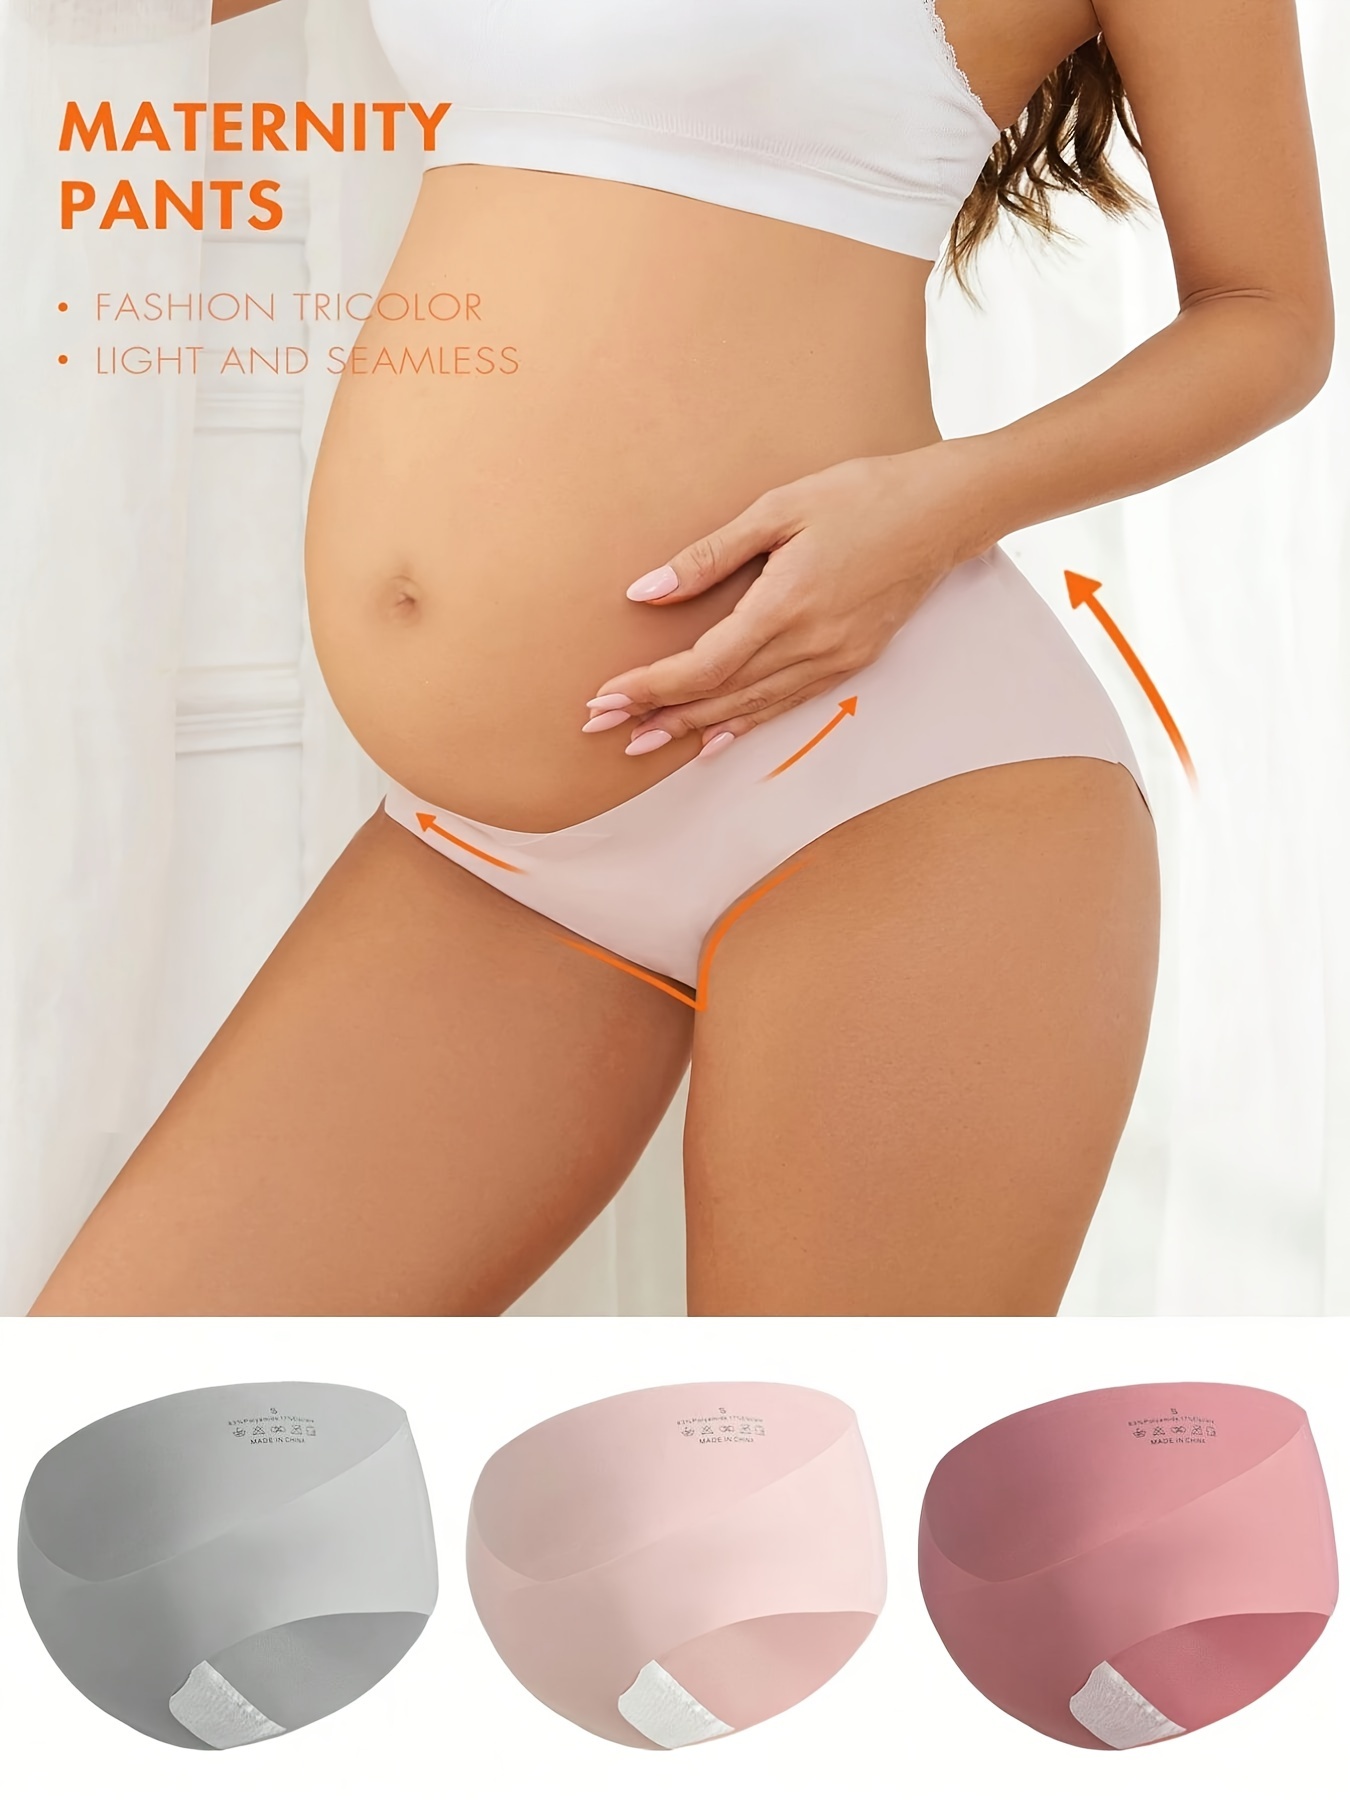 Ladies Briefs for Pregnant Low Waist Belly Maternity Panties Women Clothes  Seamless Underwear Cotton Pregnancy Underpants